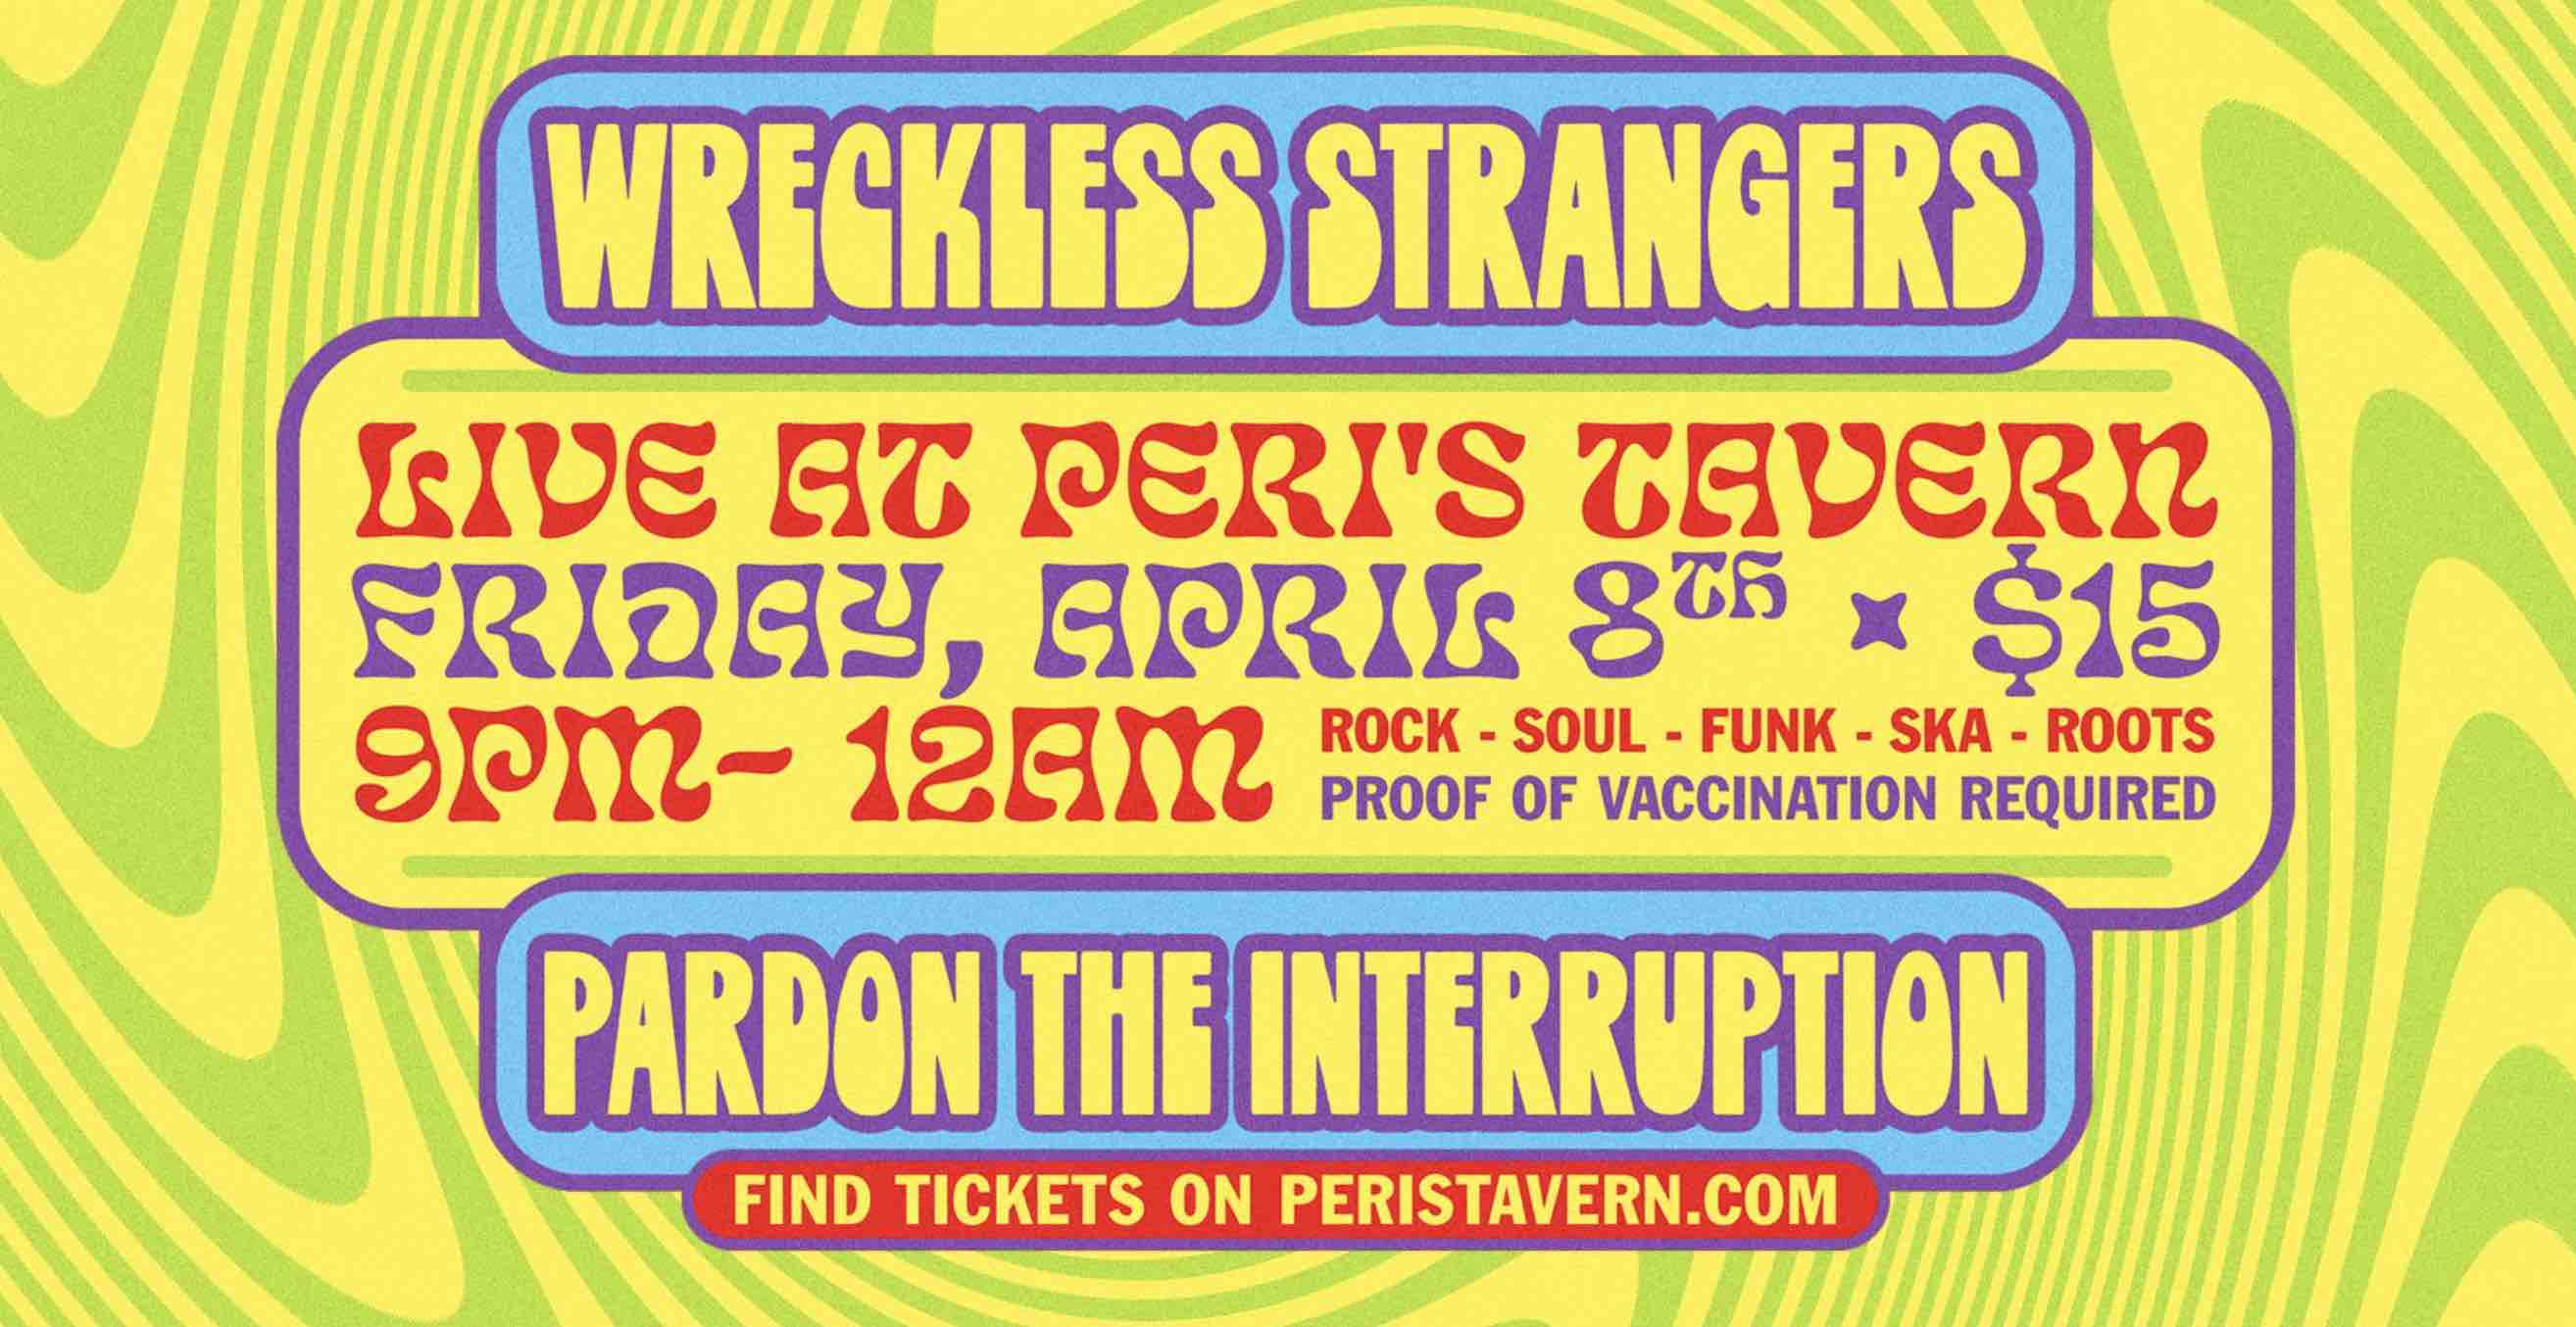 The Wreckless Strangers to Play Newly Re-opened Peri’s in Marin County